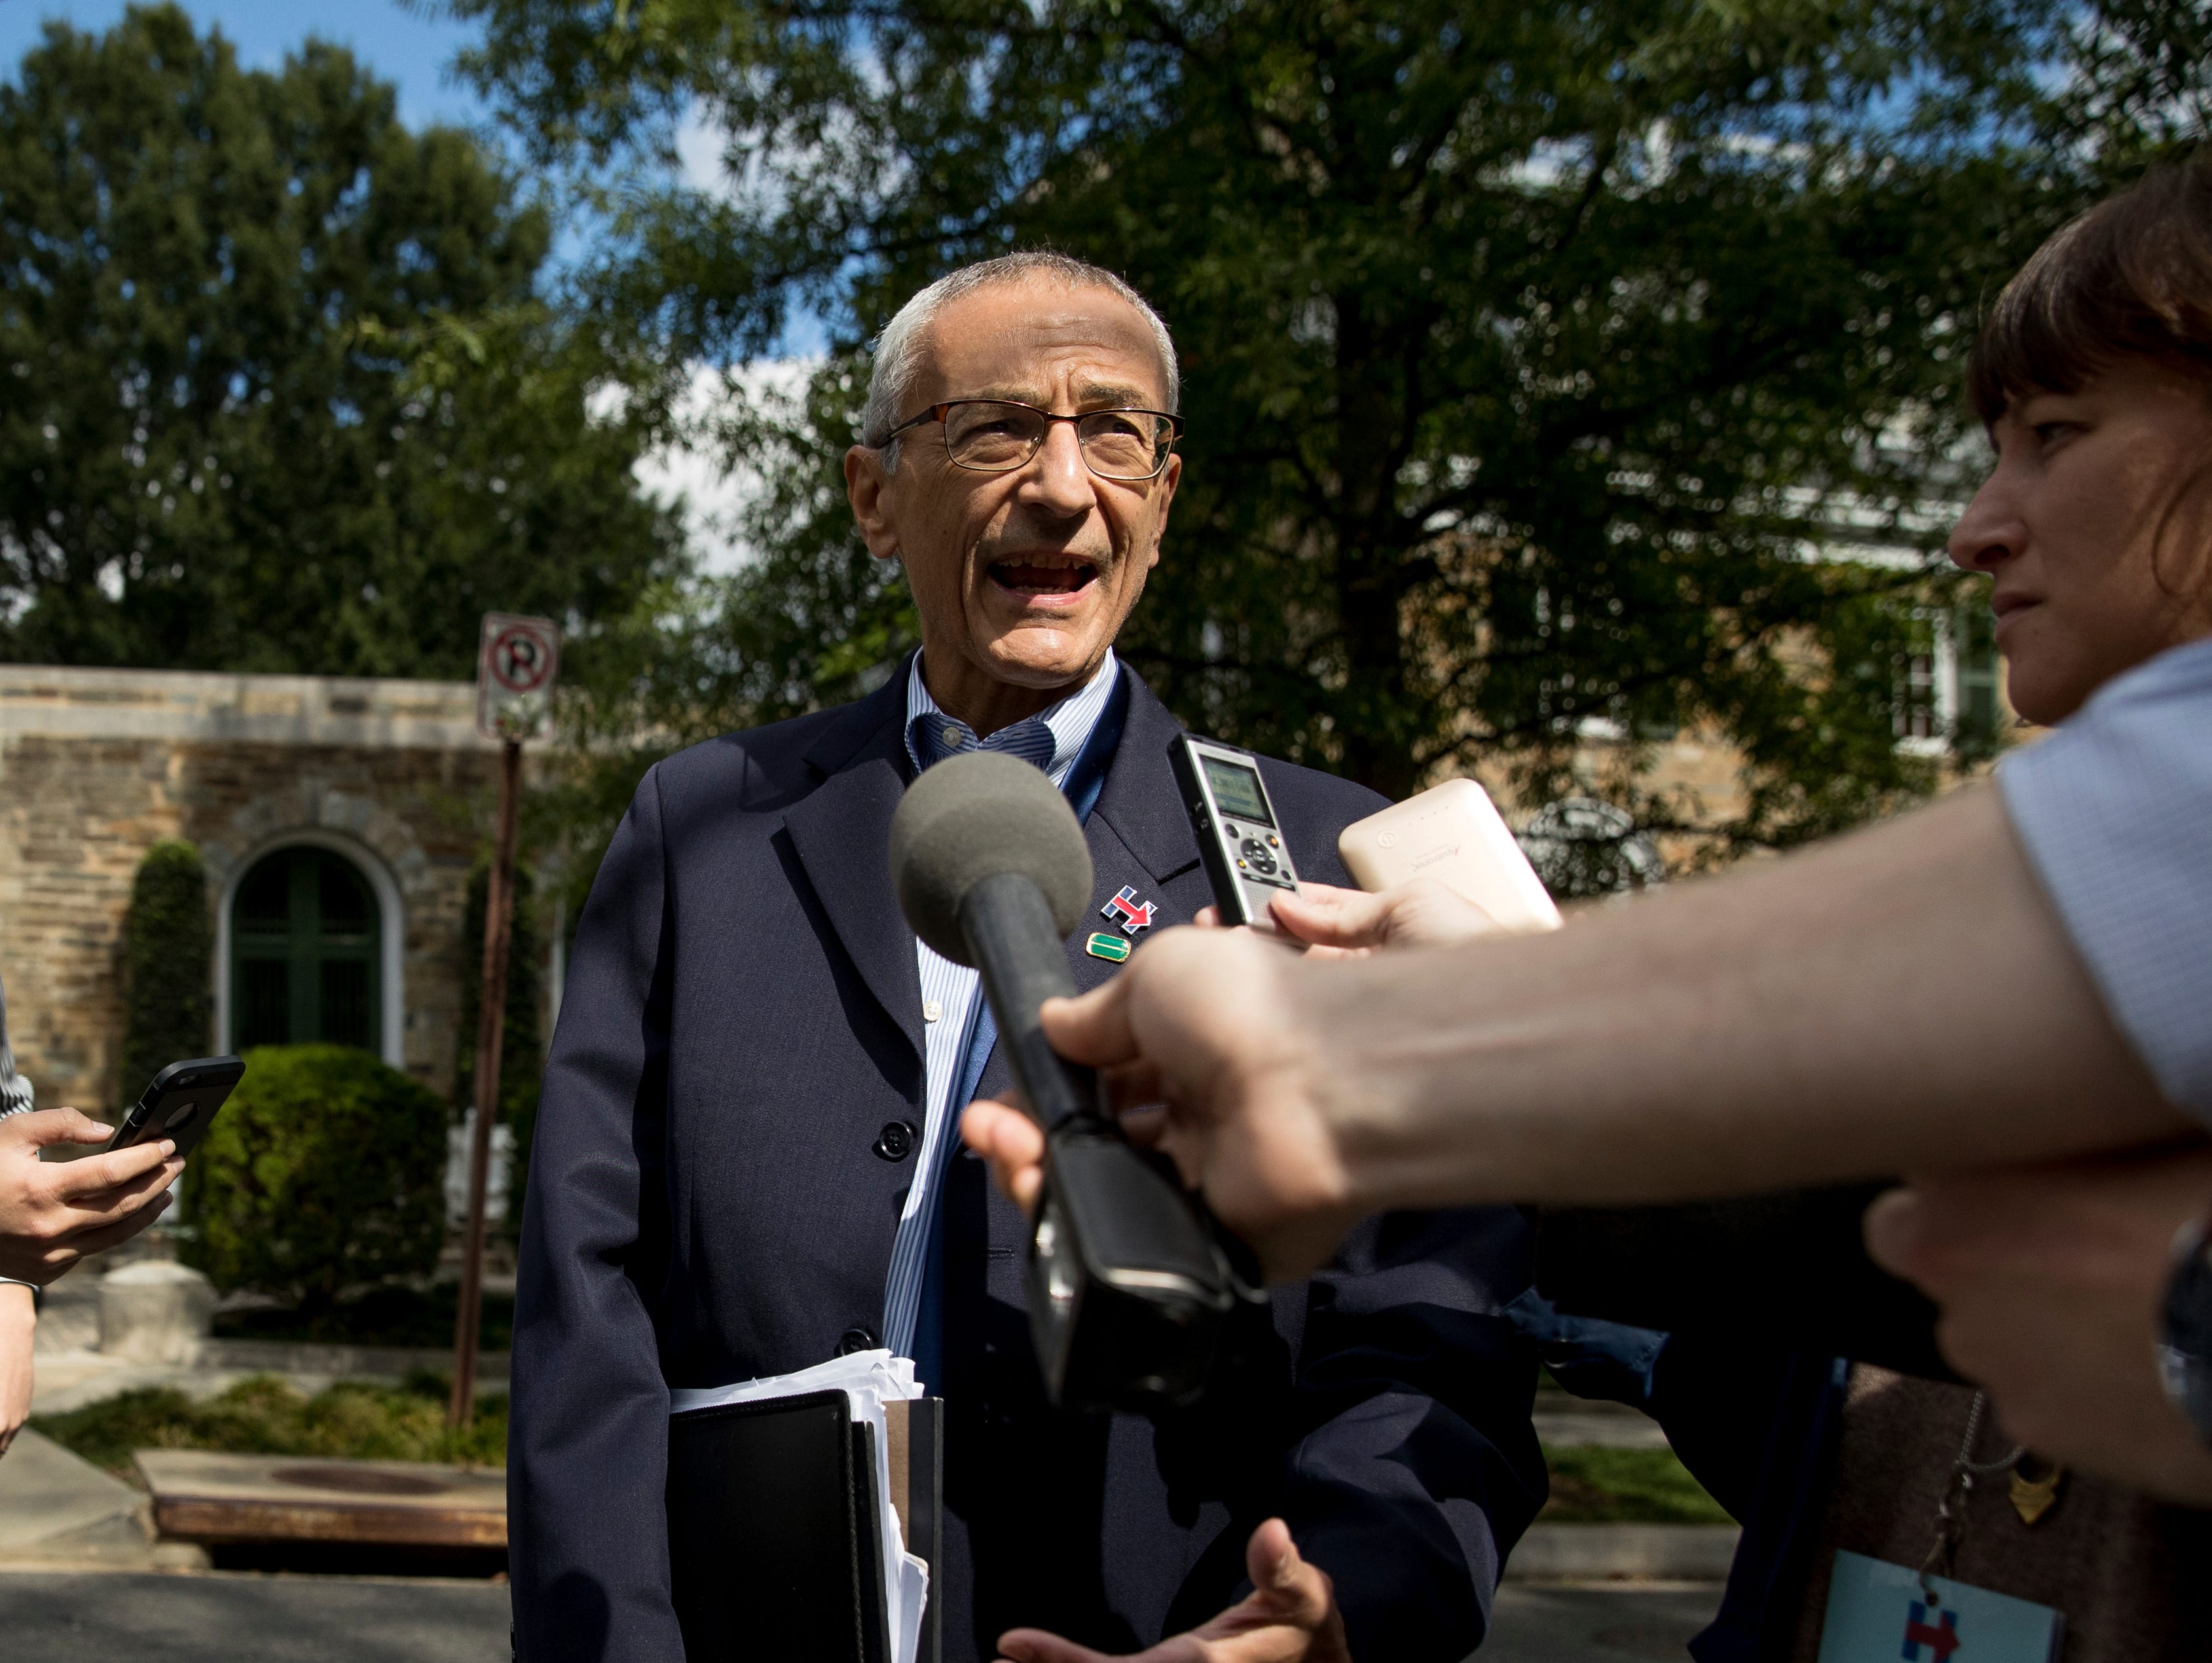 Hillary Clinton's campaign chairman, John Podesta, speaks to reporters in Washington in October.